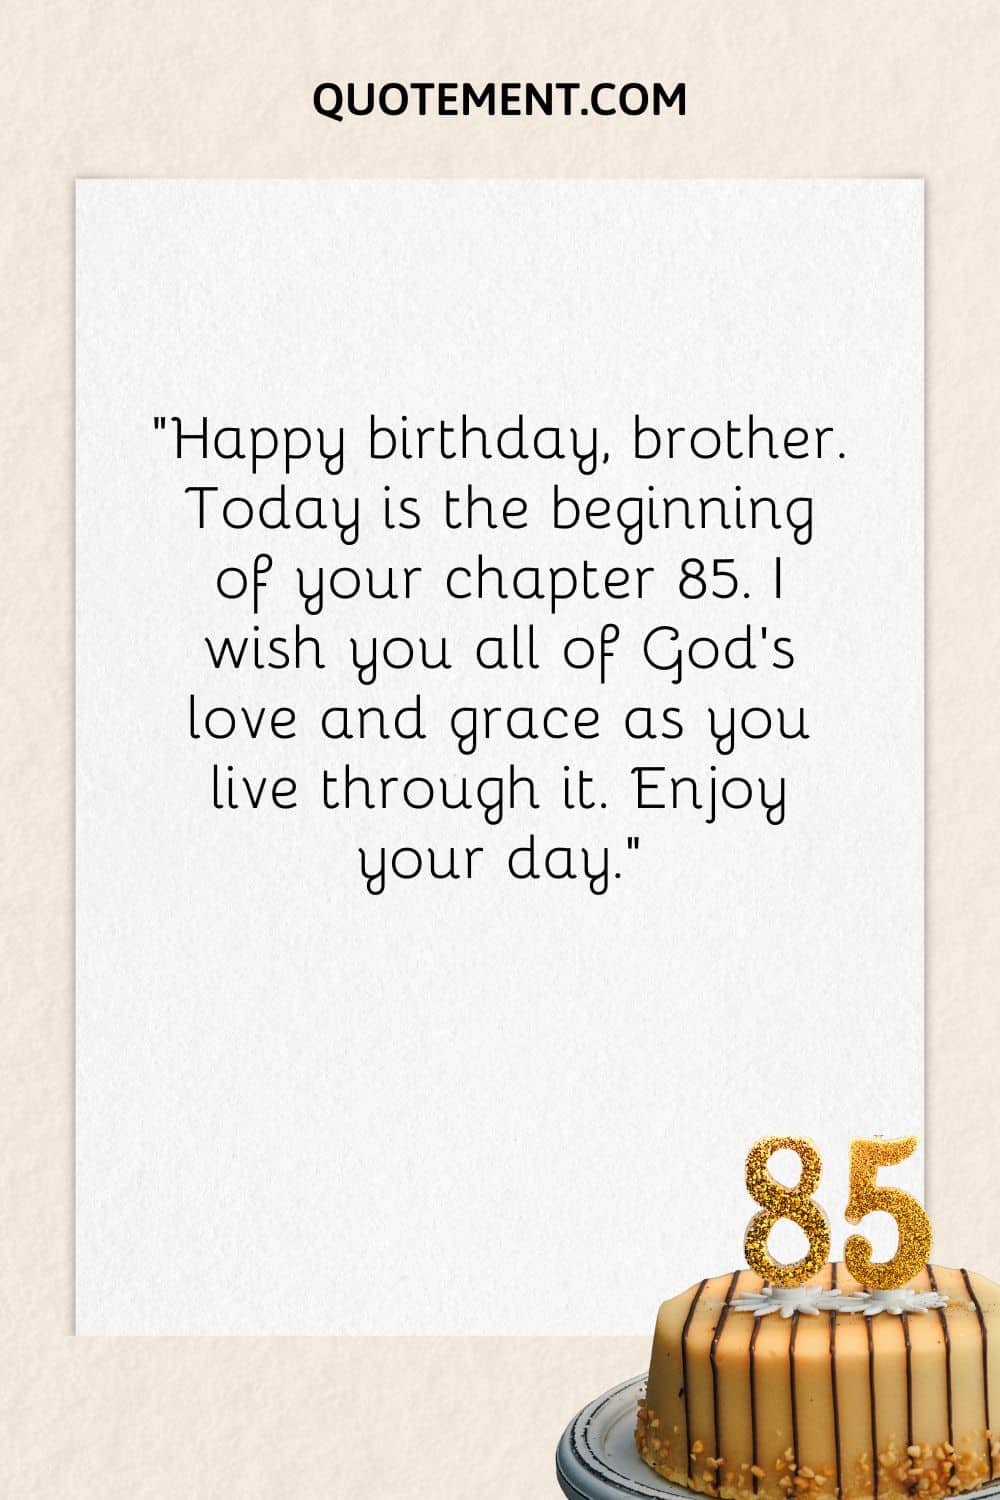 “Happy birthday, brother. Today is the beginning of your chapter 85. I wish you all of God’s love and grace as you live through it. Enjoy your day.”